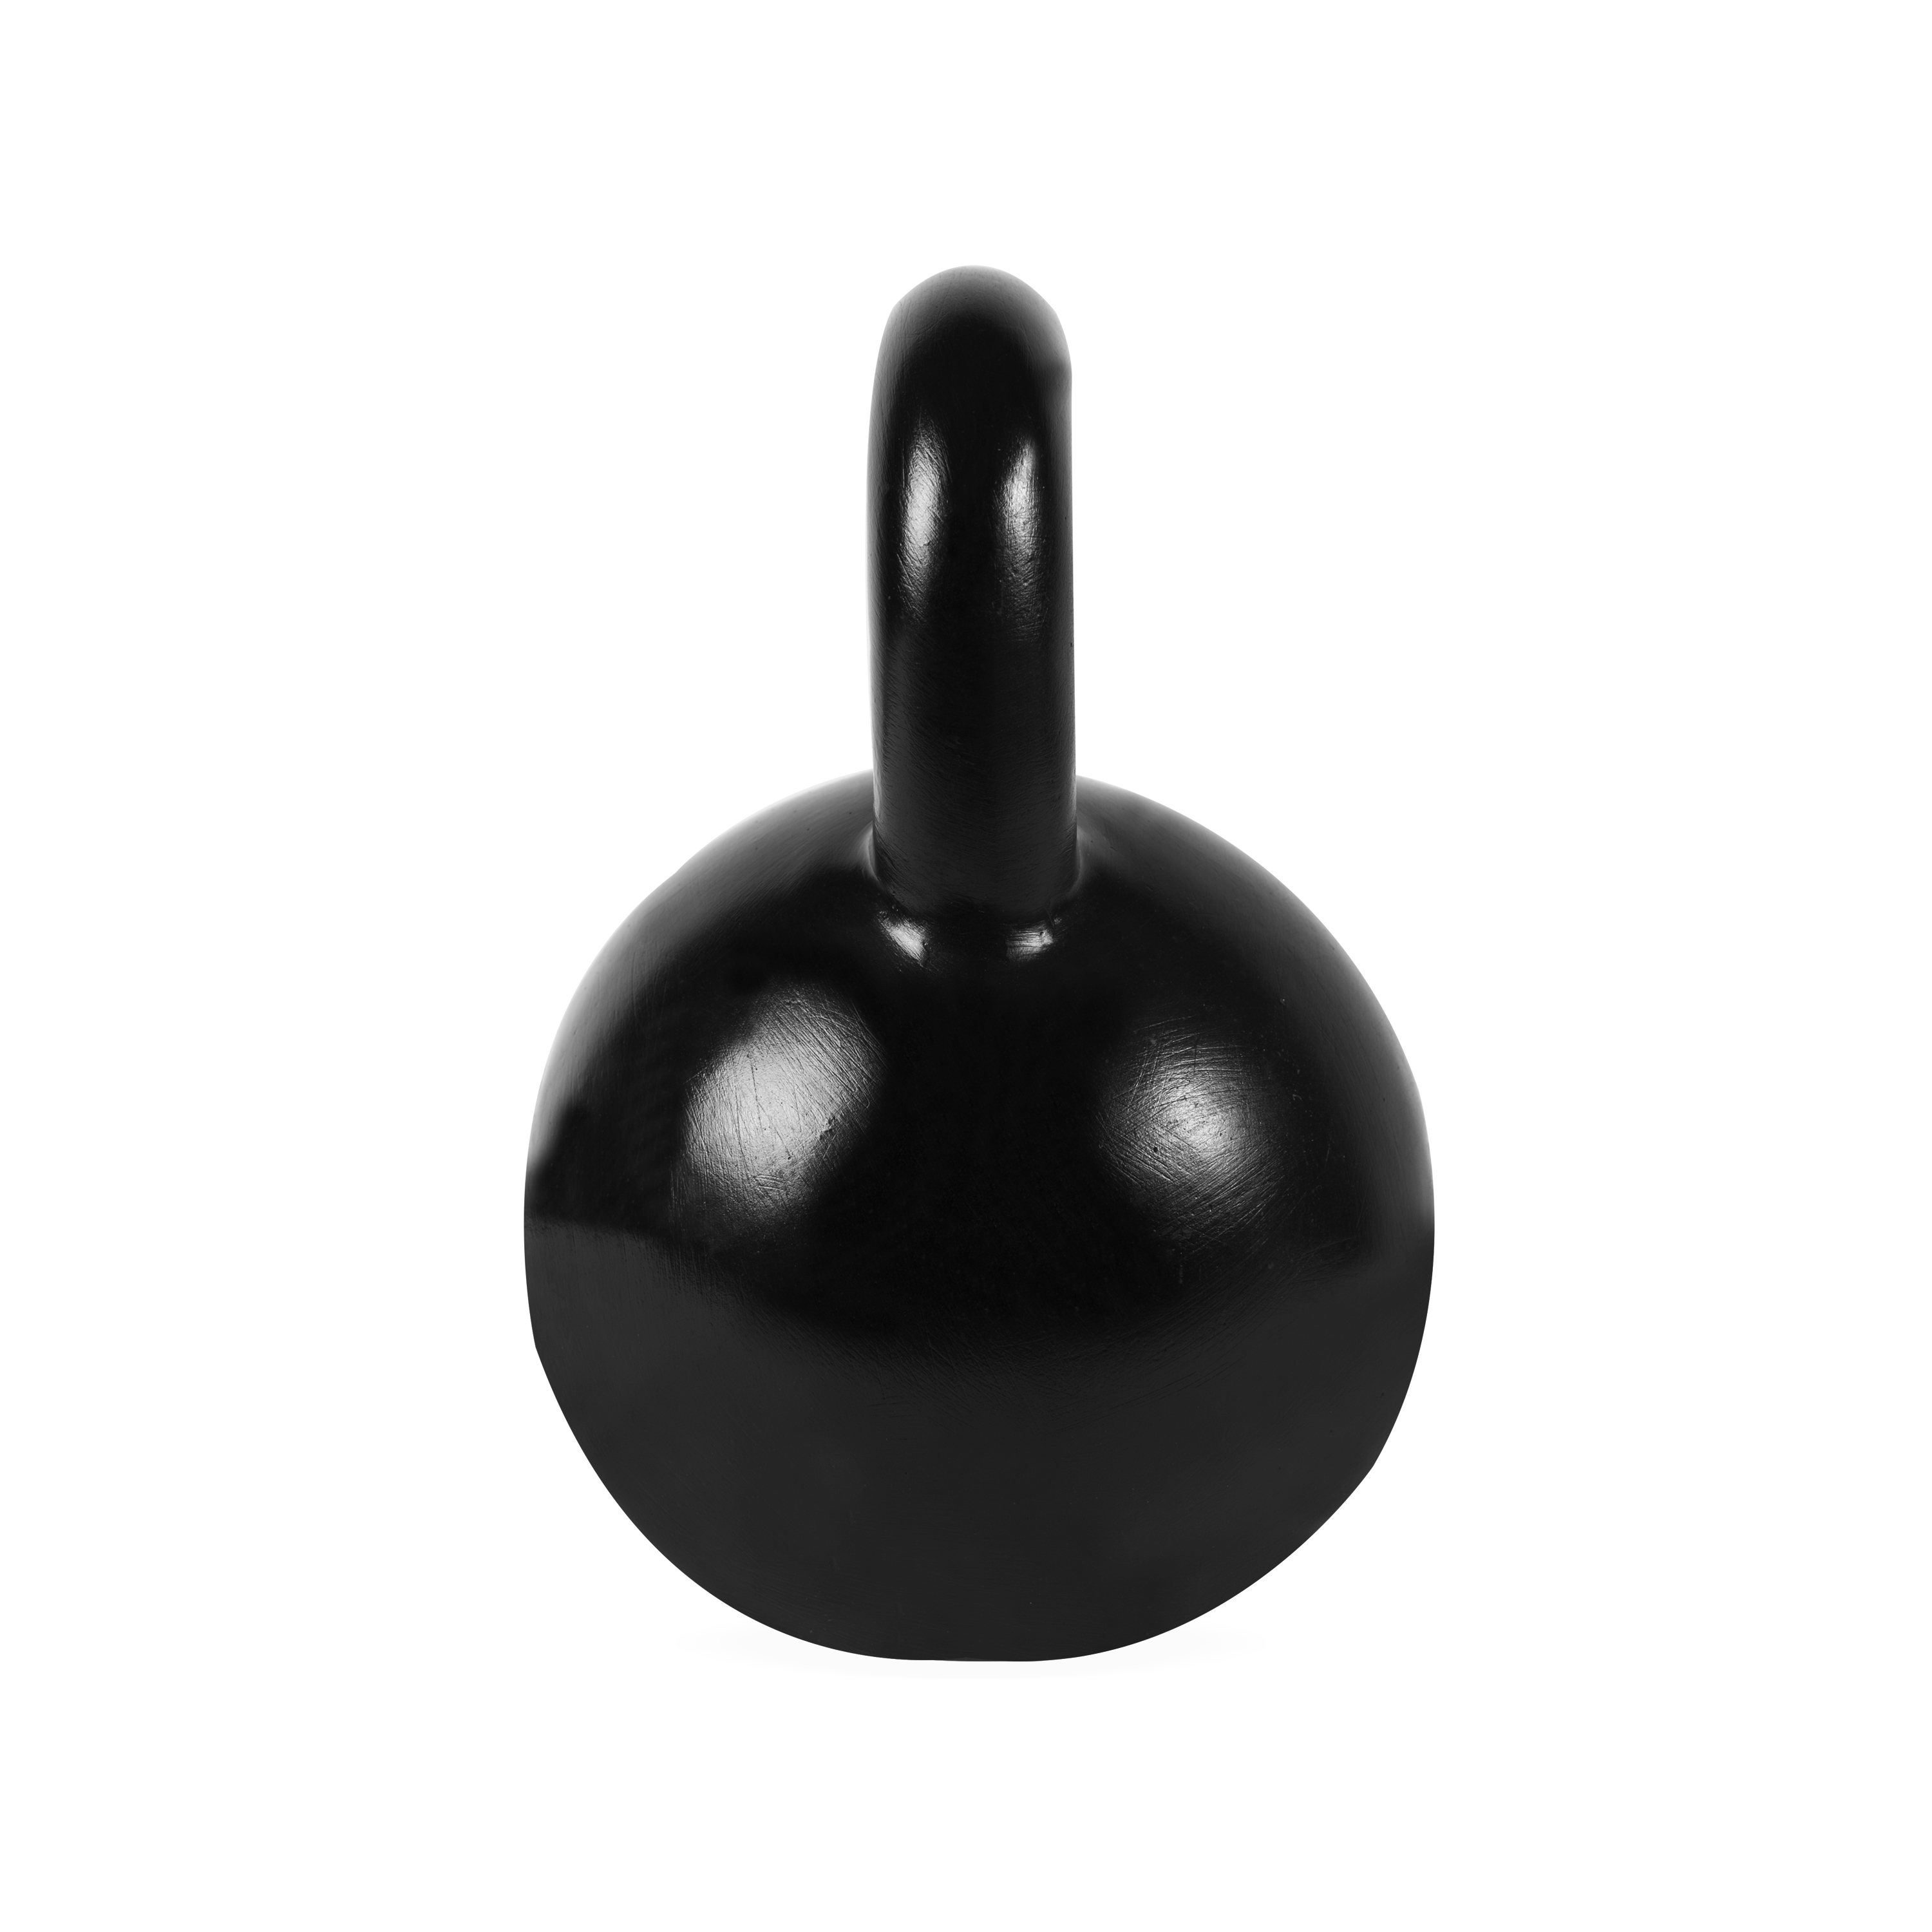 CAP Barbell Cast Iron Kettlebell, Black 45LBS - image 3 of 8